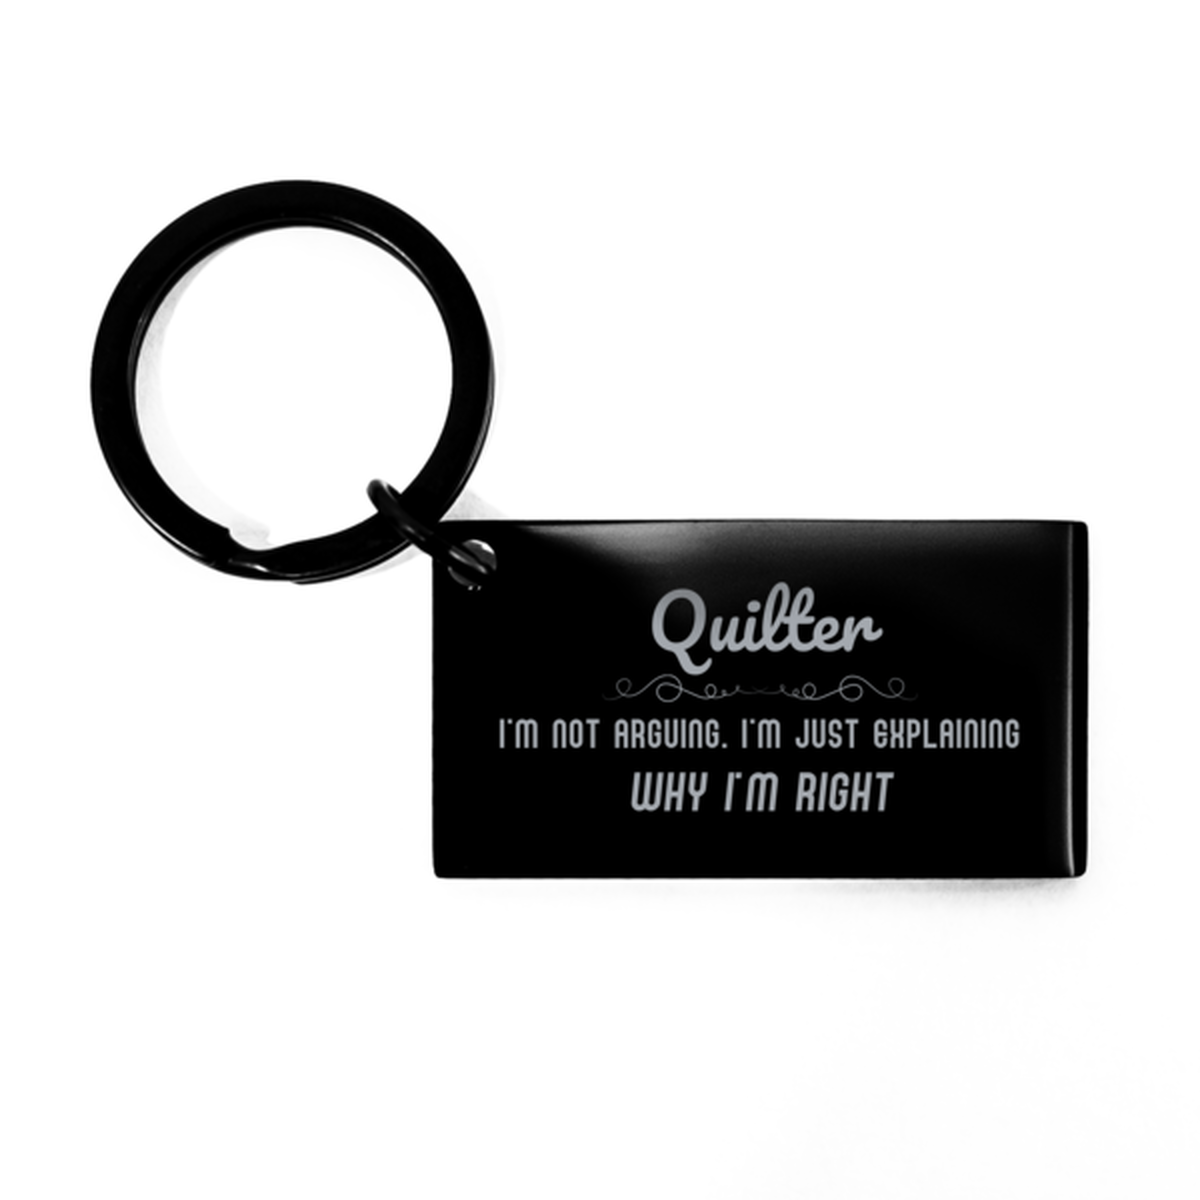 Quilter I'm not Arguing. I'm Just Explaining Why I'm RIGHT Keychain, Funny Saying Quote Quilter Gifts For Quilter Graduation Birthday Christmas Gifts for Men Women Coworker